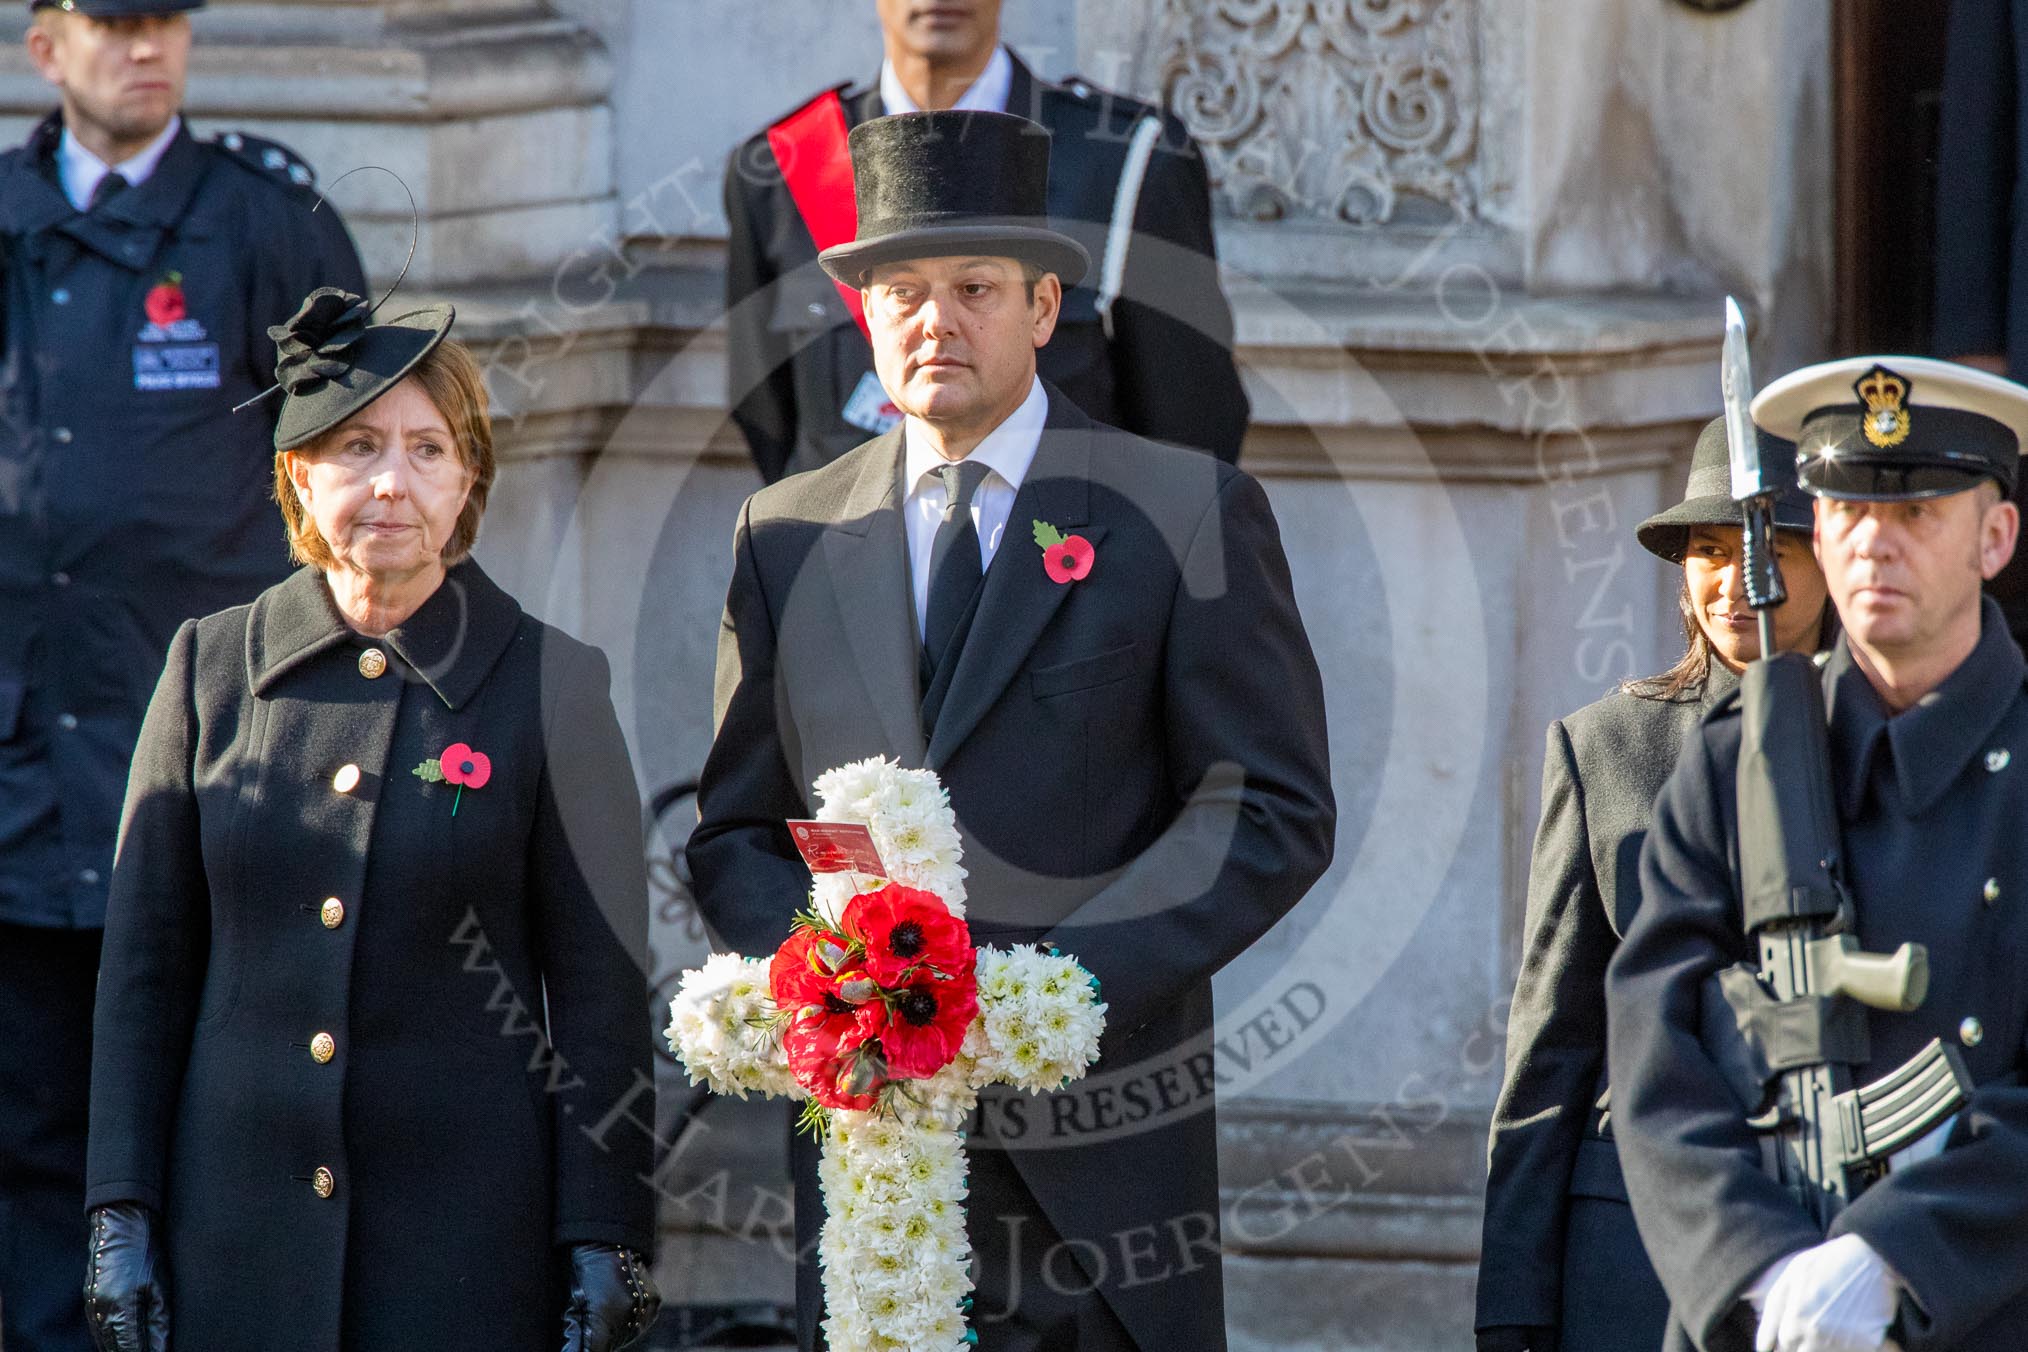 during Remembrance Sunday Cenotaph Ceremony 2018 at Horse Guards Parade, Westminster, London, 11 November 2018, 11:33.